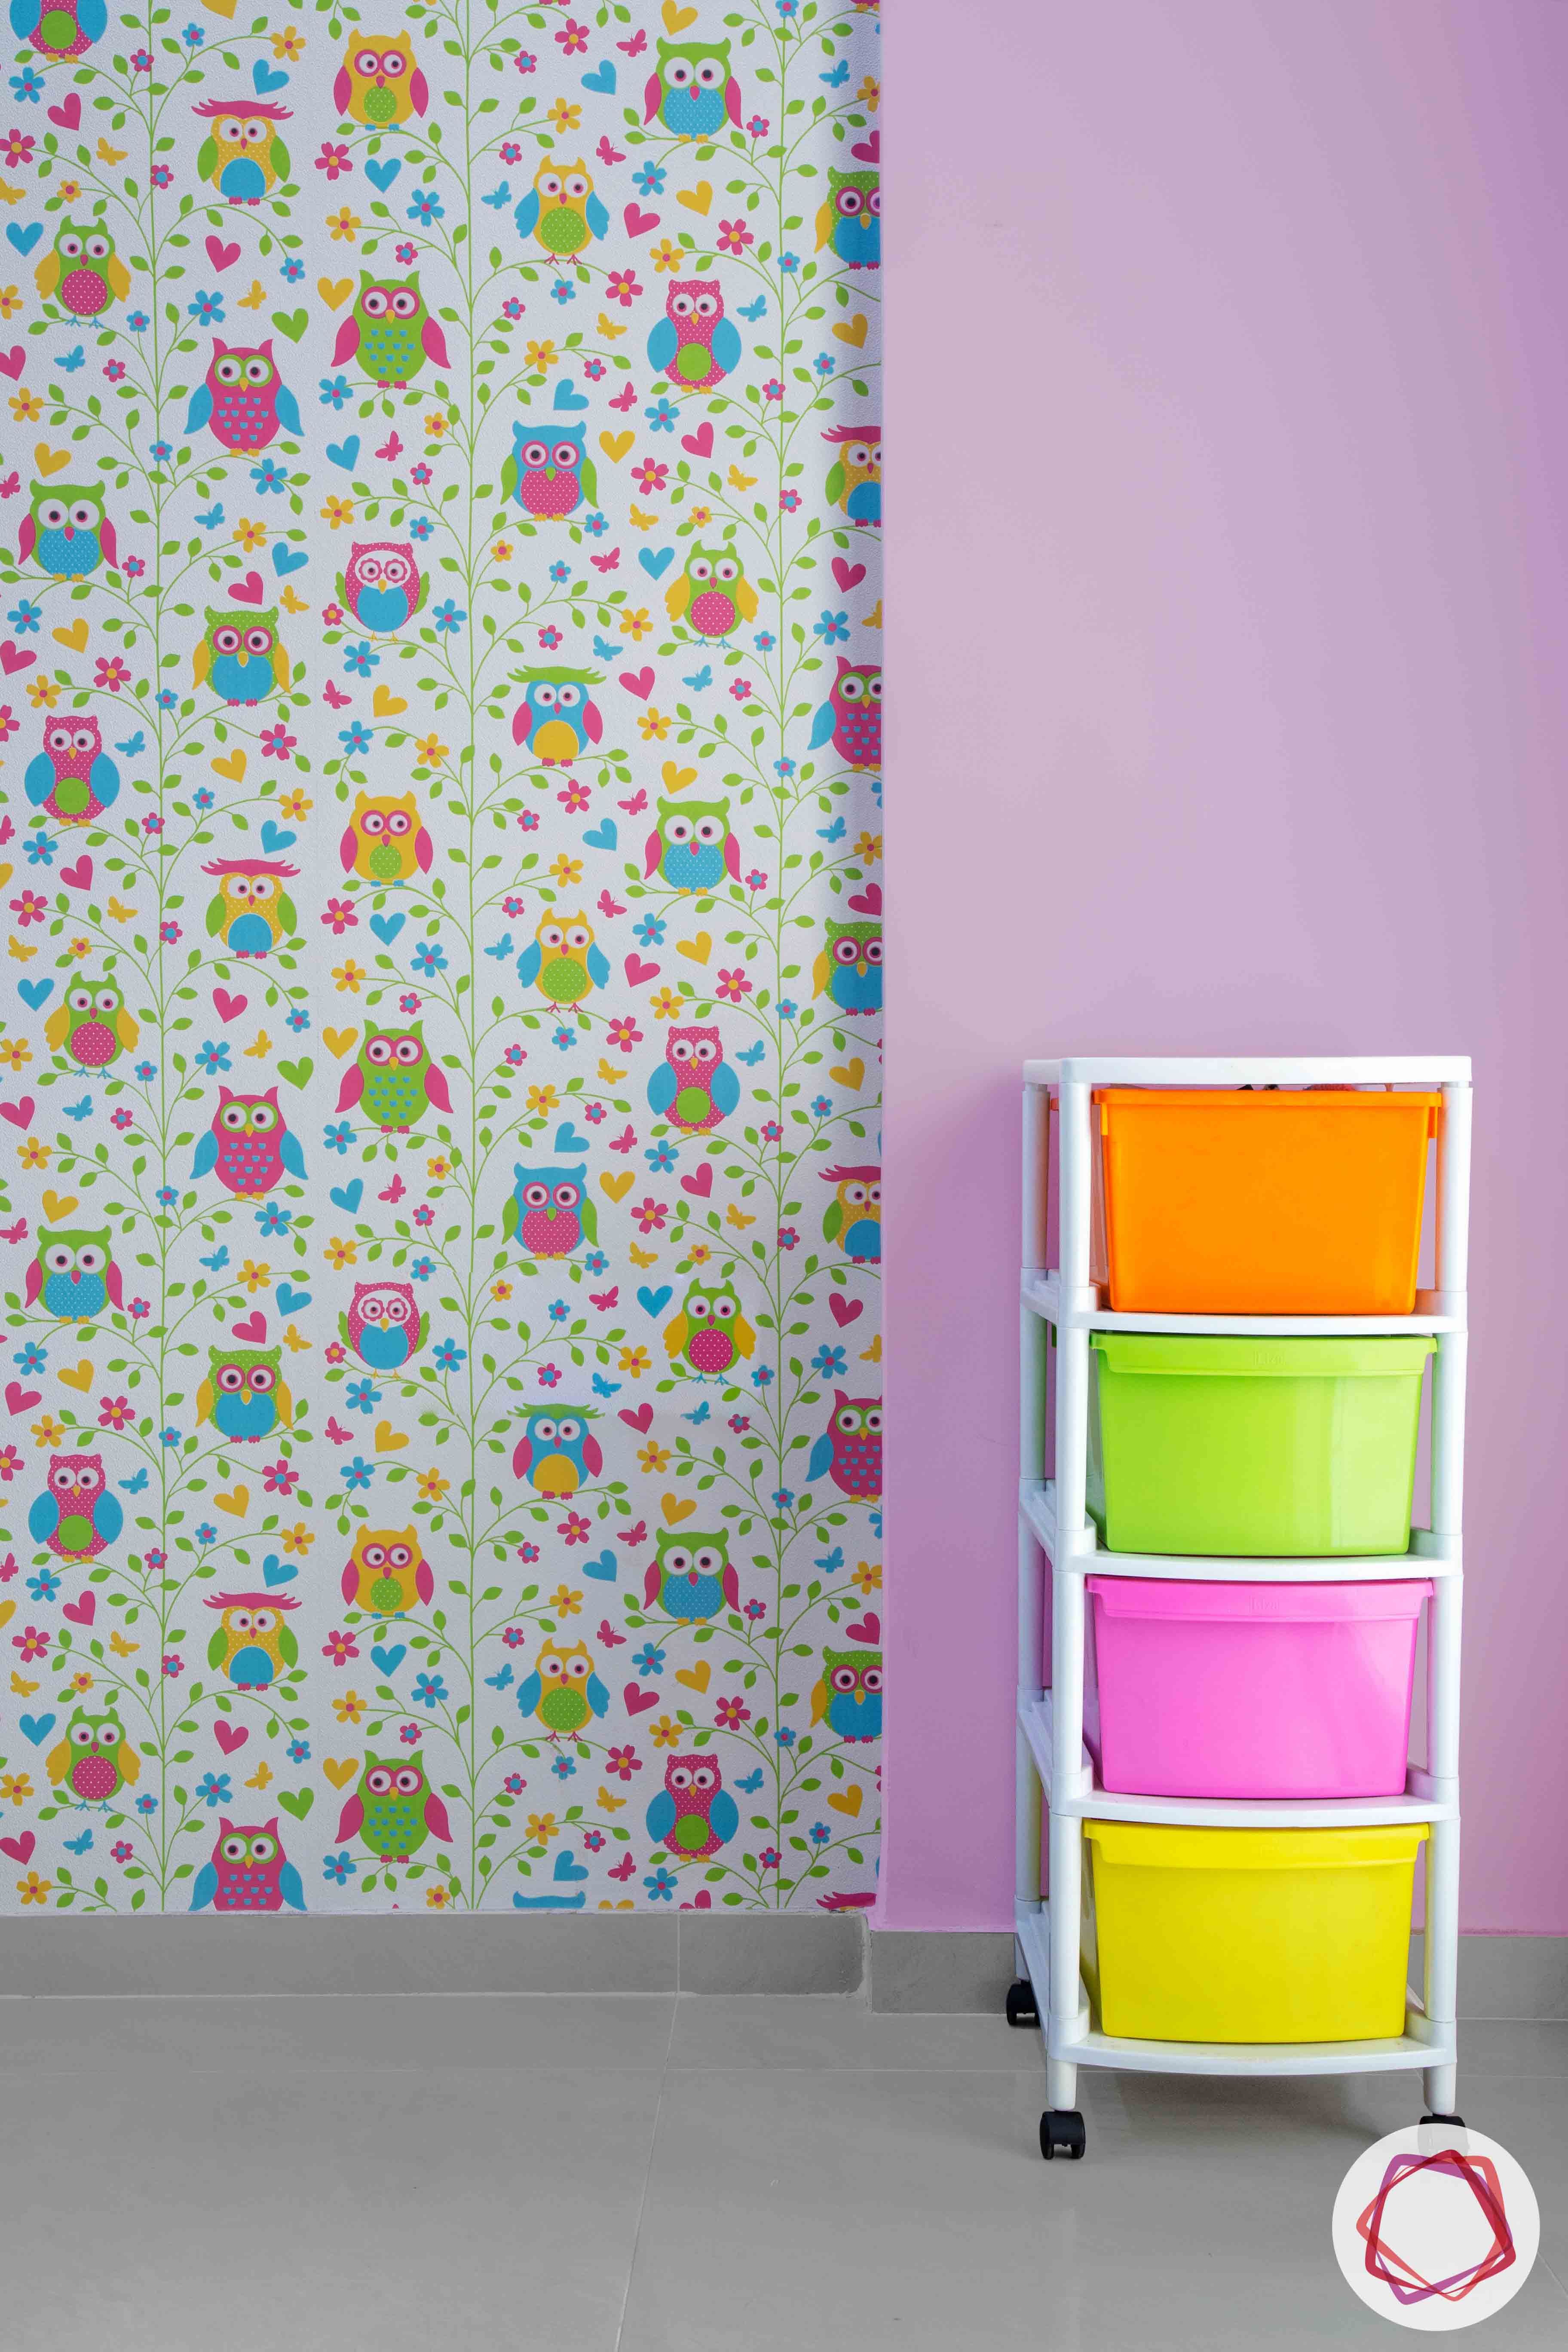 3bhk flat interior design-chest of drawers designs-wallpaper for kids room